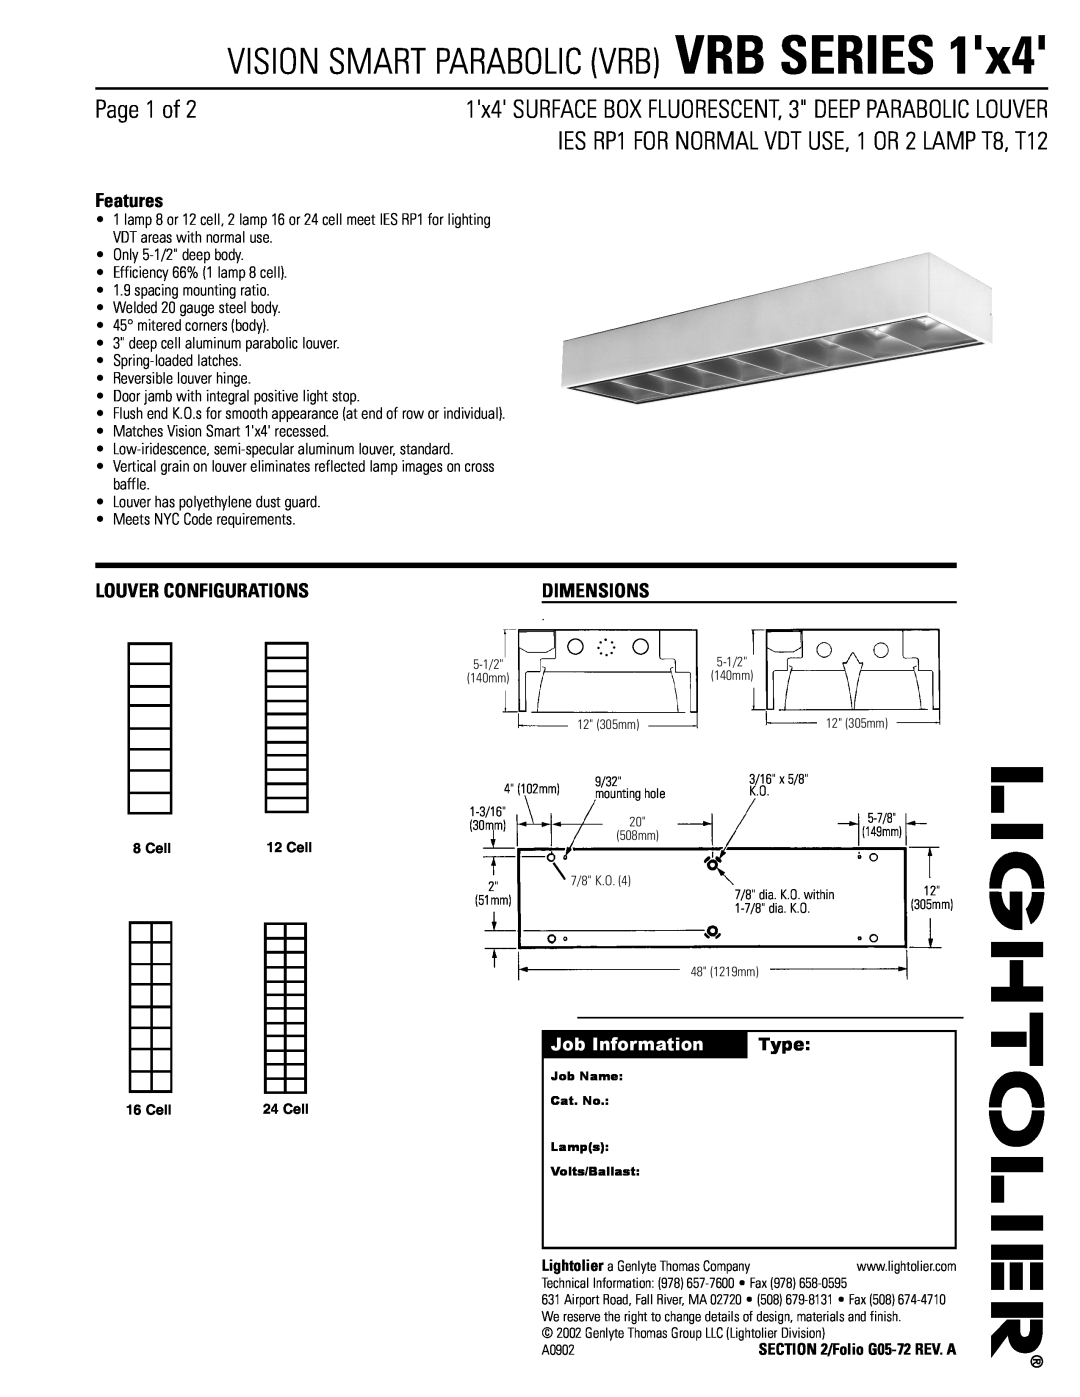 Lightolier VRB Series dimensions Vision Smart Parabolic Vrb Vrb Series, Page 1 of, Features, Louver Configurations, Type 